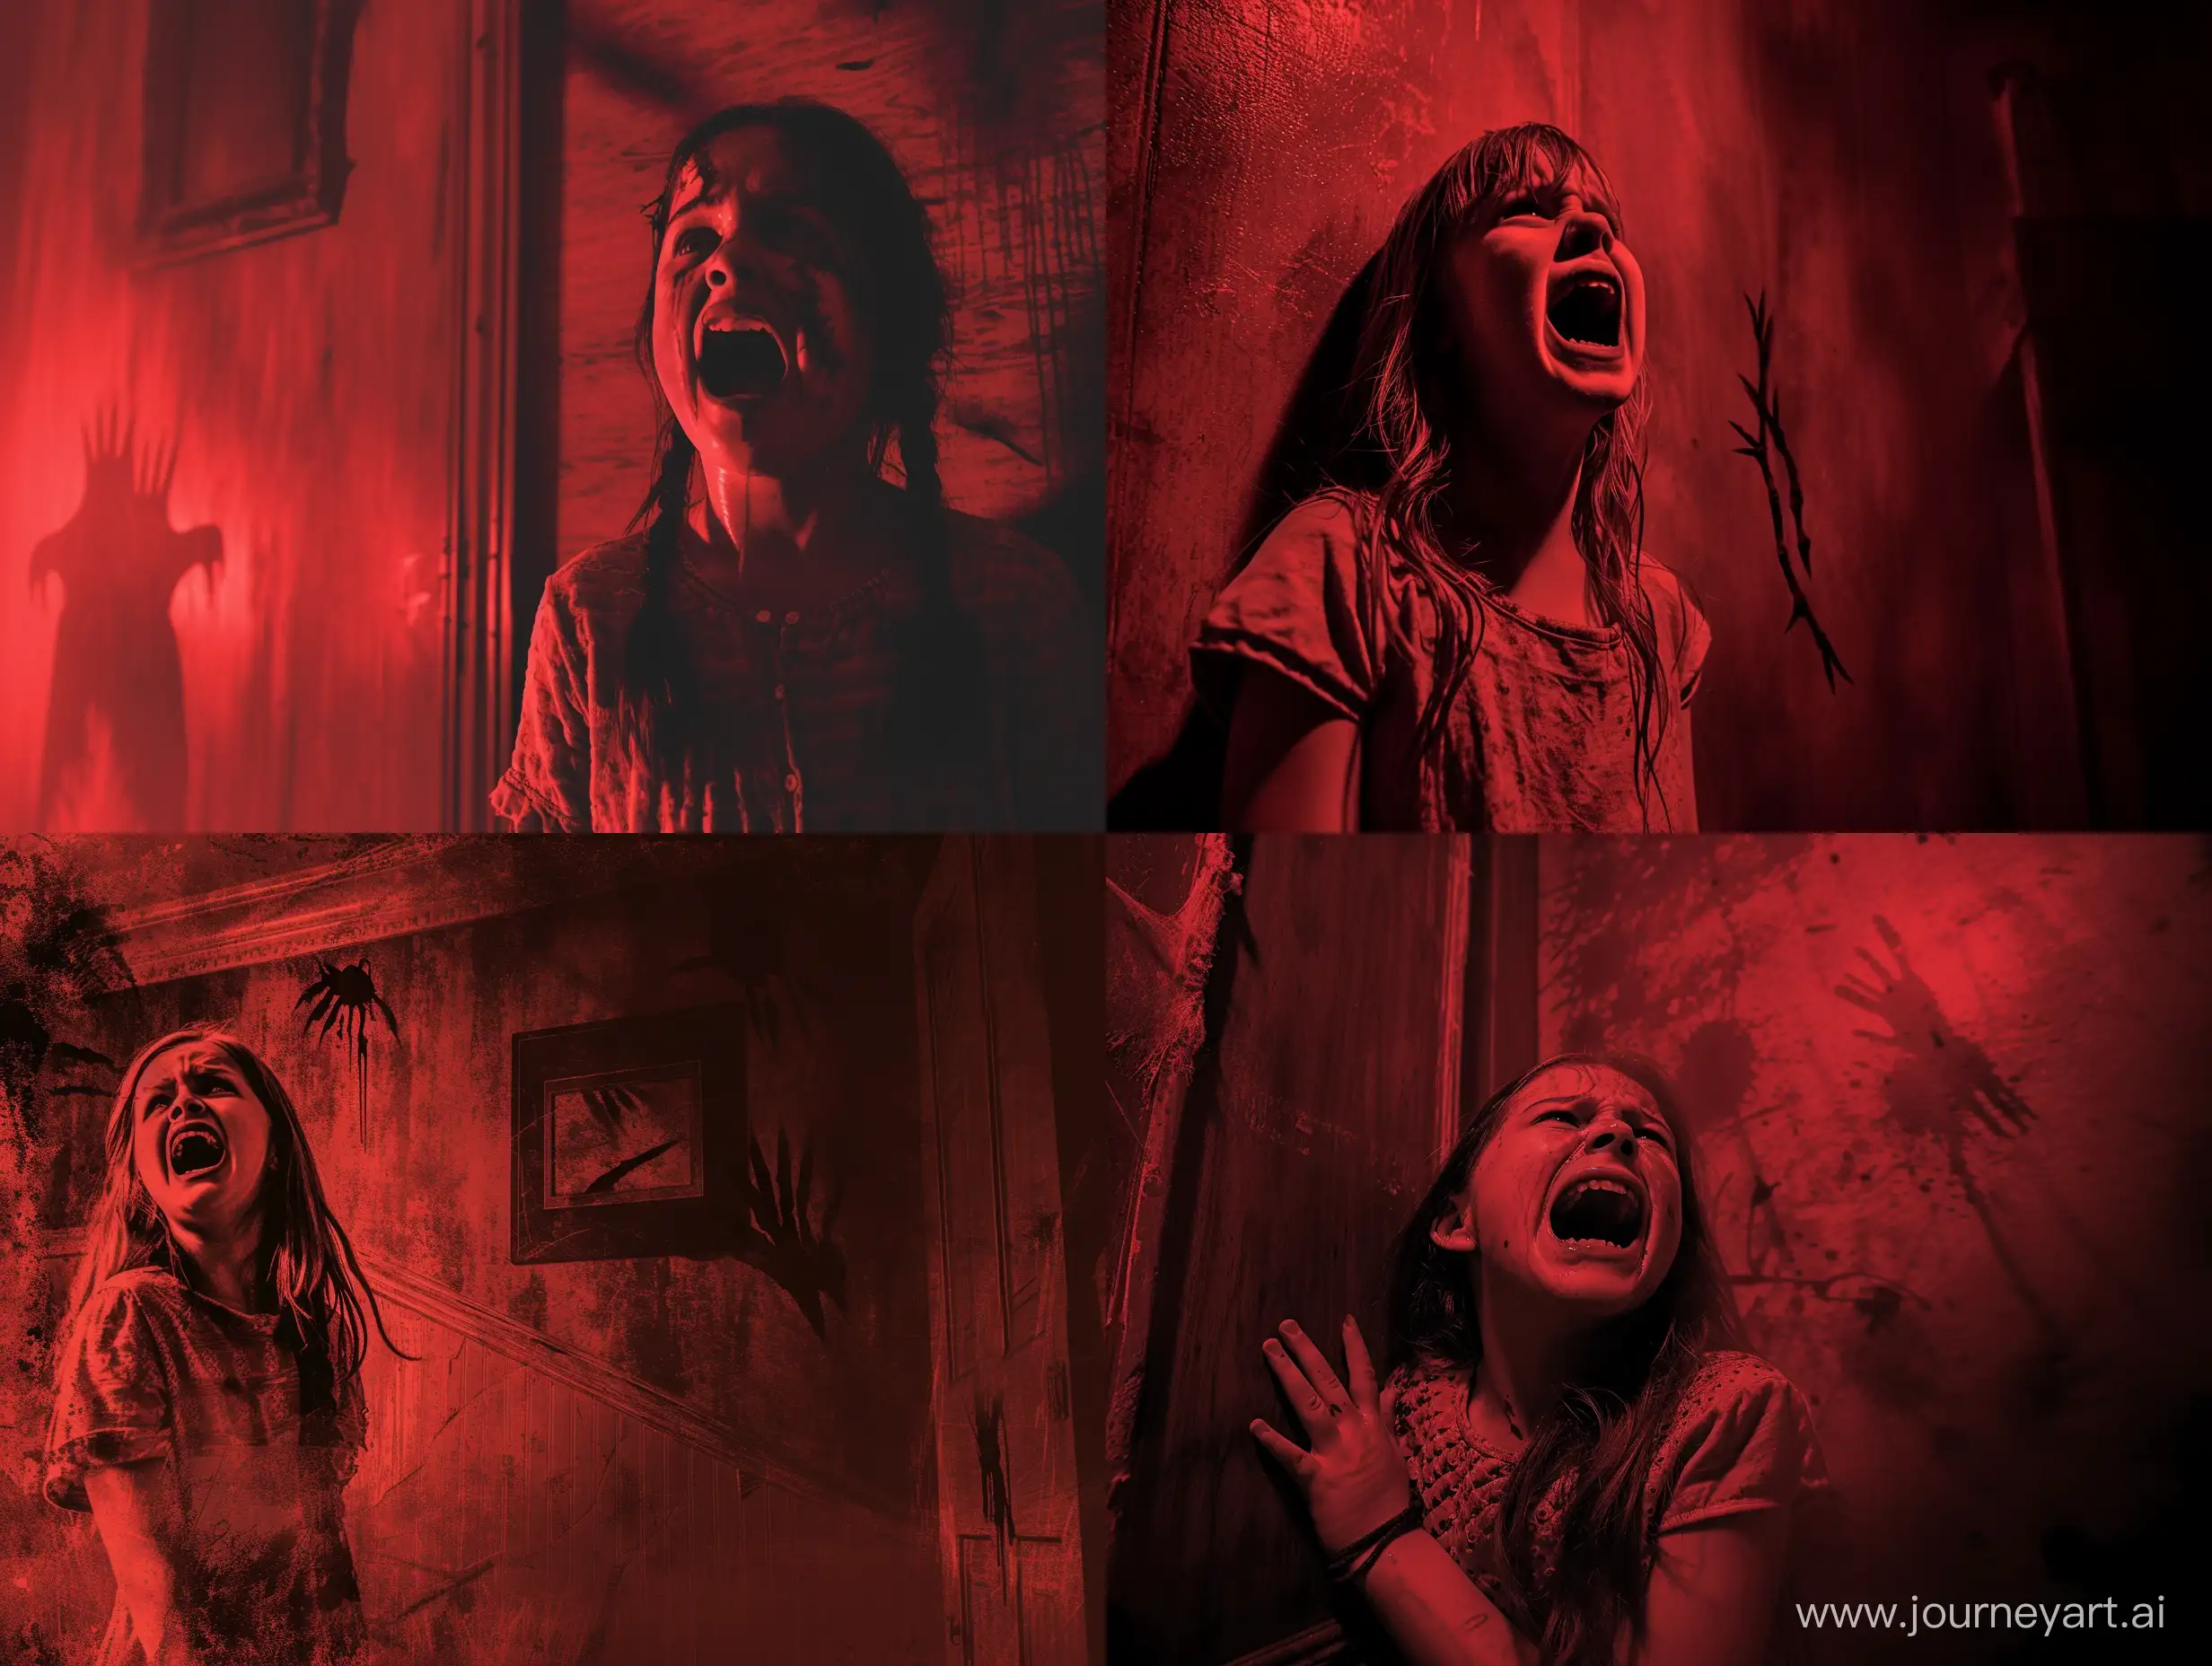 create a cinematic background: a girl cries in fear, a creepy room, claw marks on the wall, dark red tones